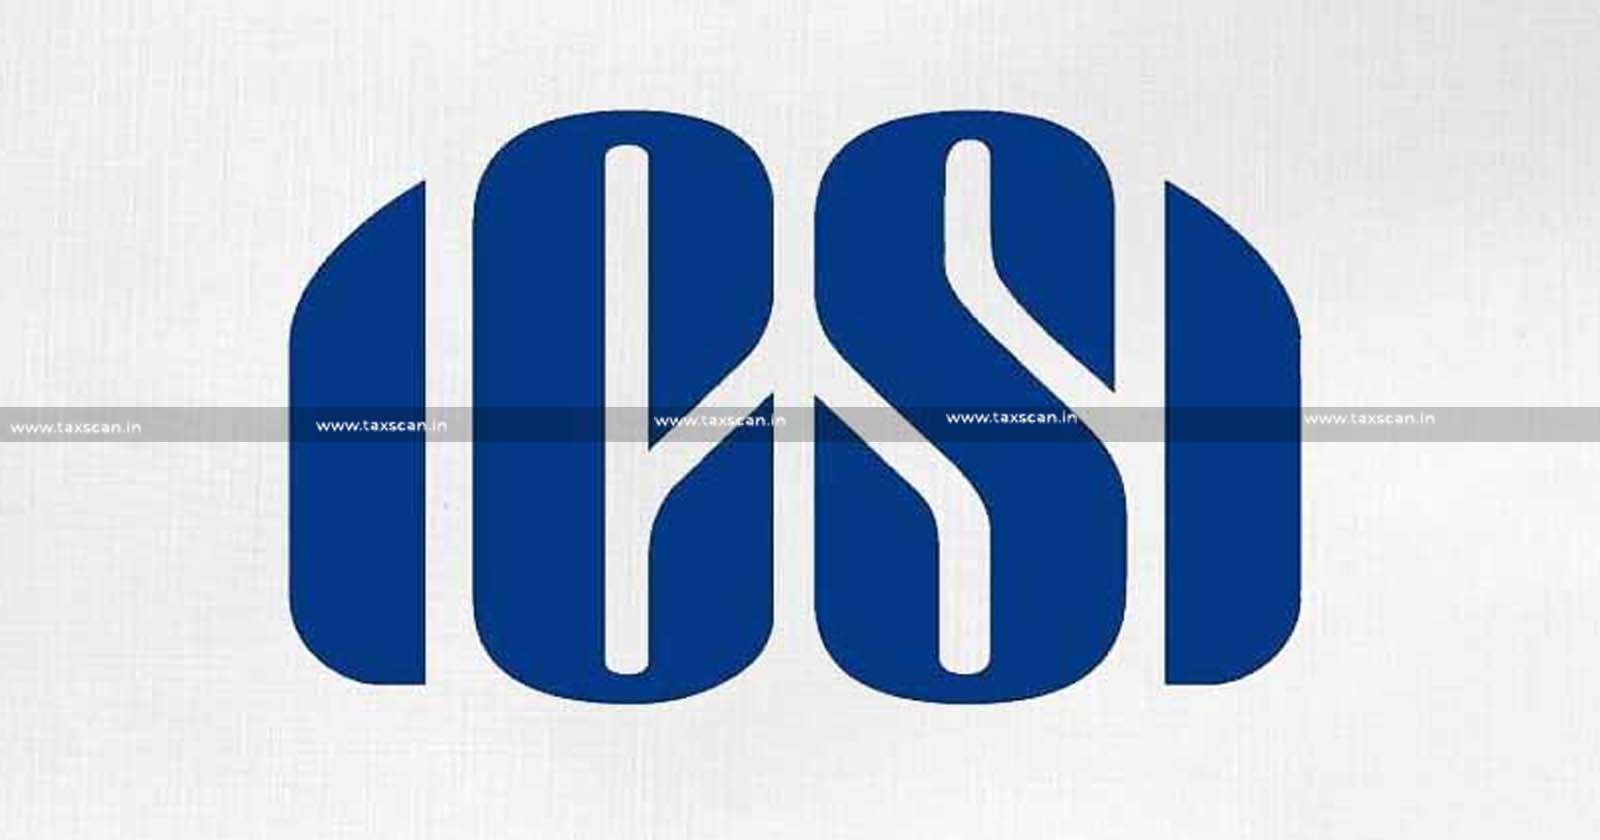 CSI - ICSI Submits Pending Issues in MCA-2 V3 Portal - MCA-2 V3 Portal - Ministry of Corporate Affairs -taxscan